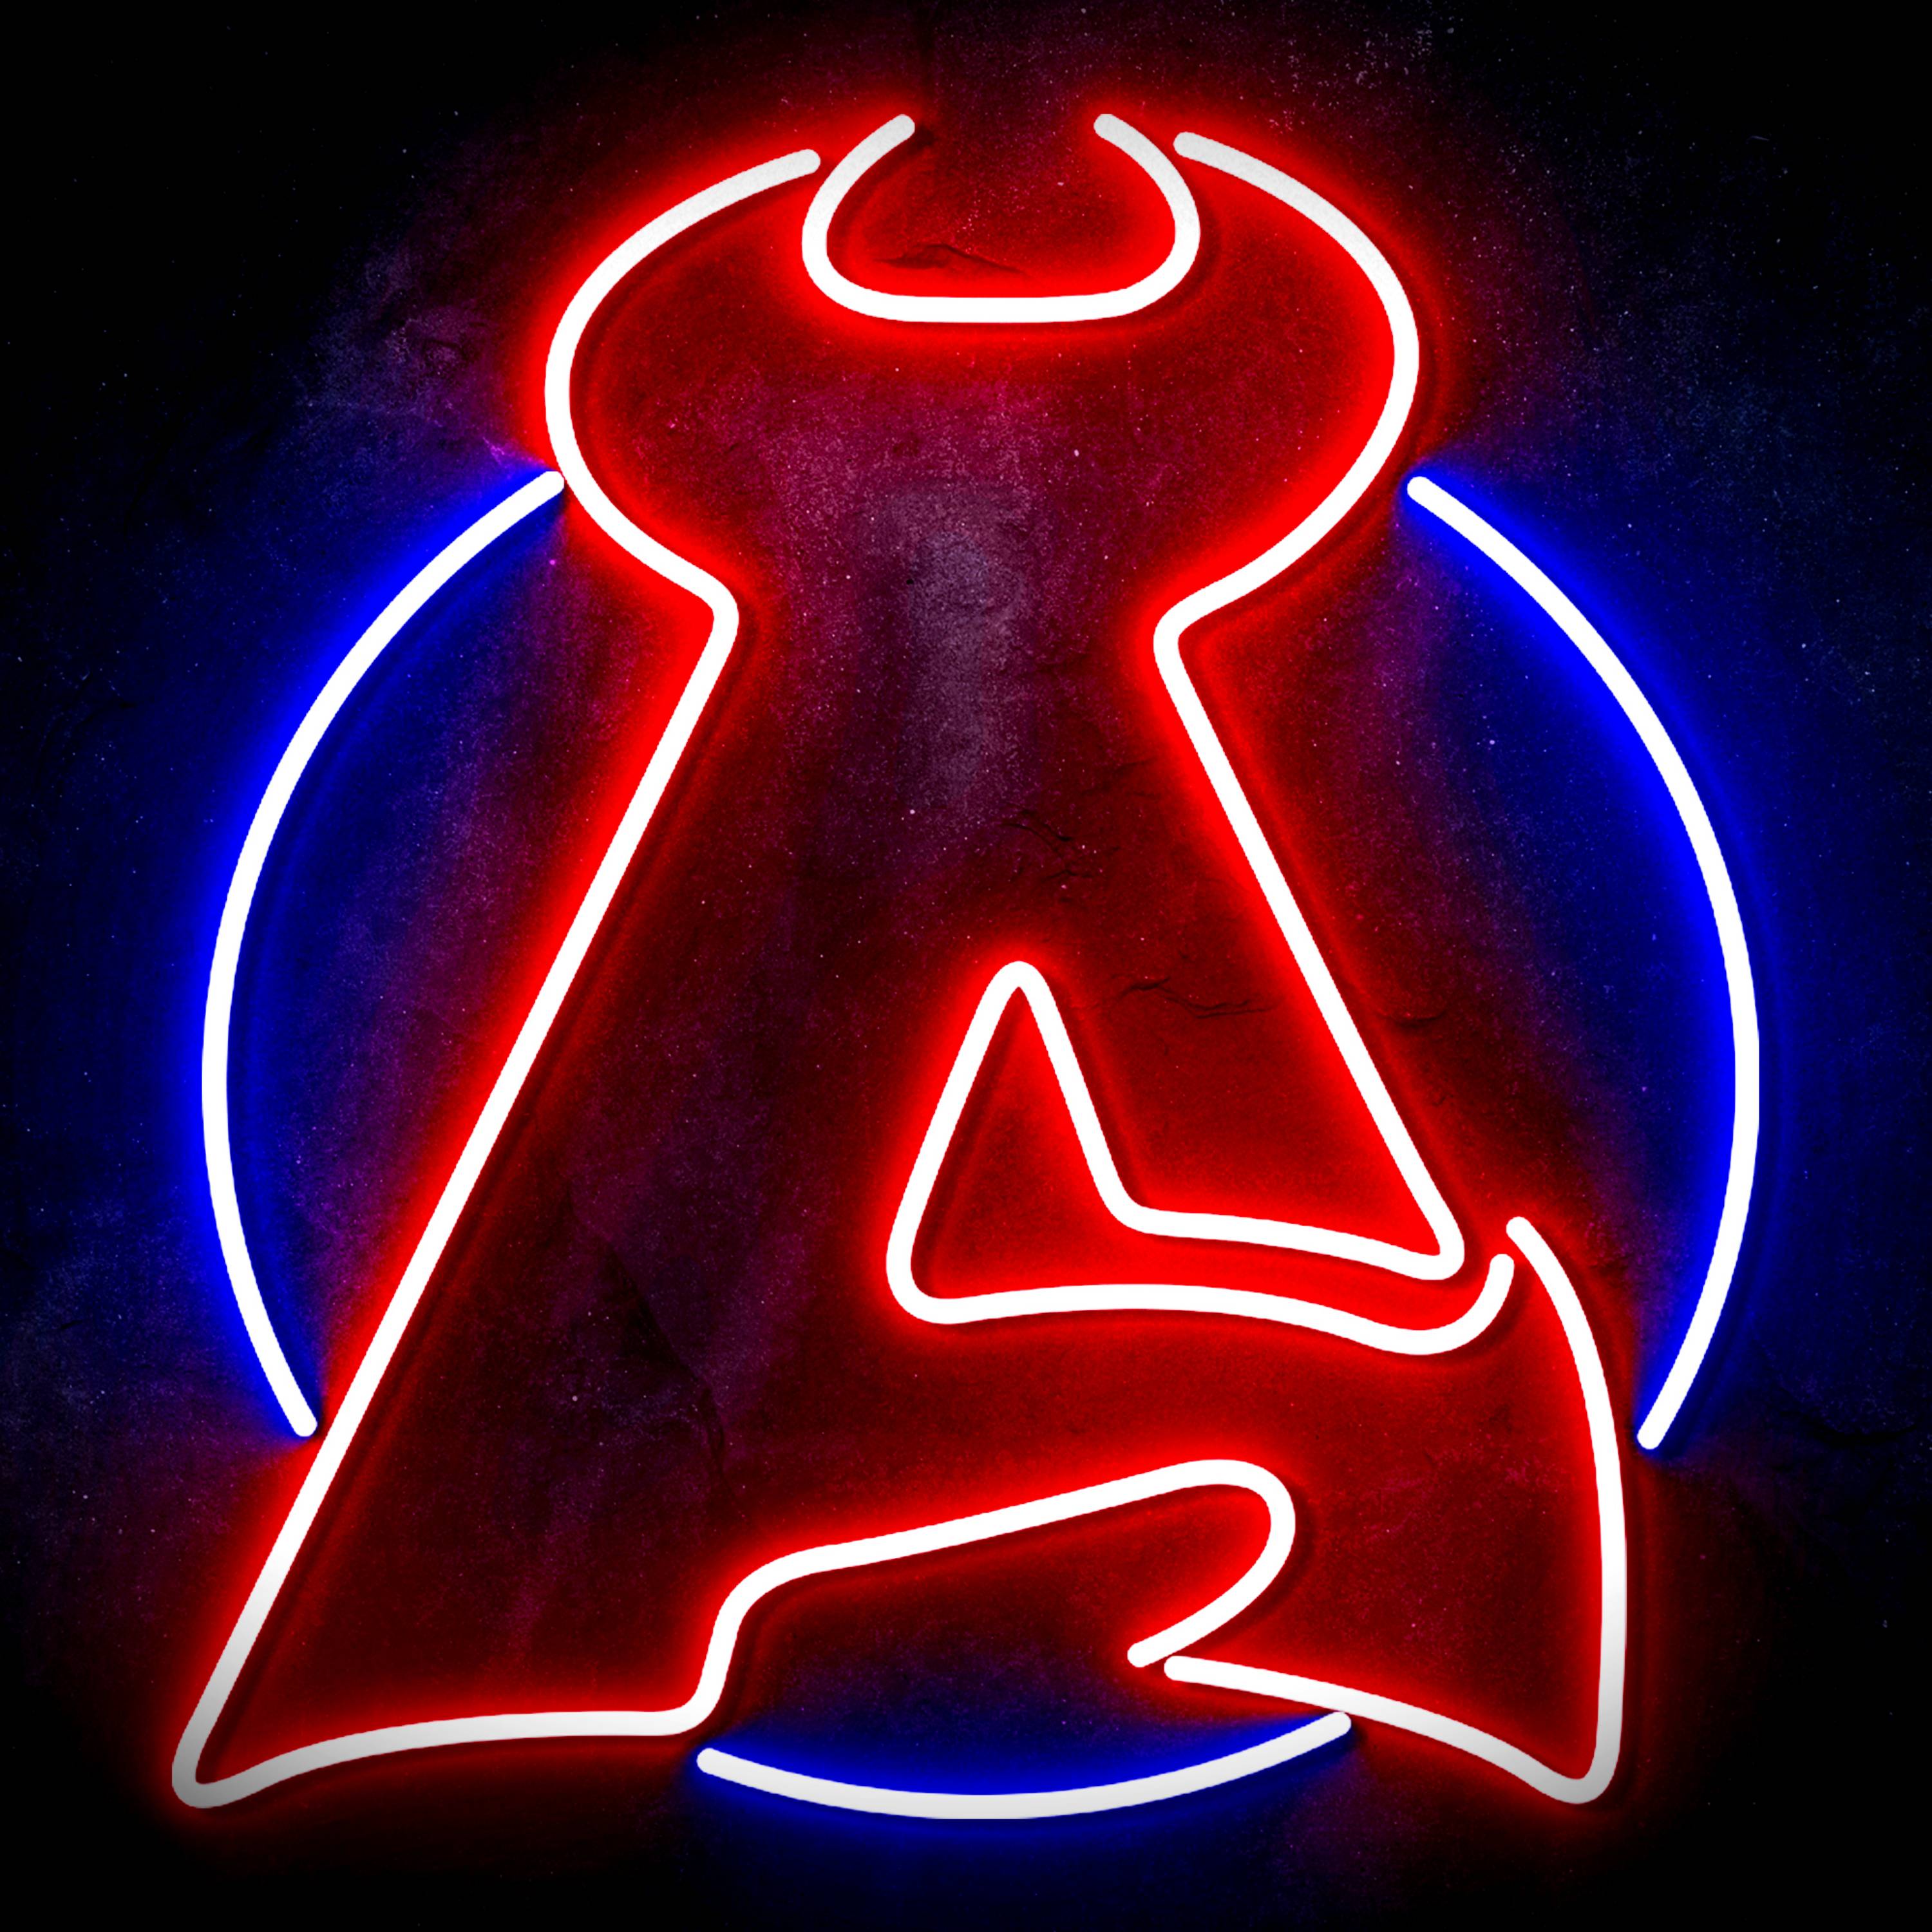 NHL New Jersey Devils LED Neon Sign